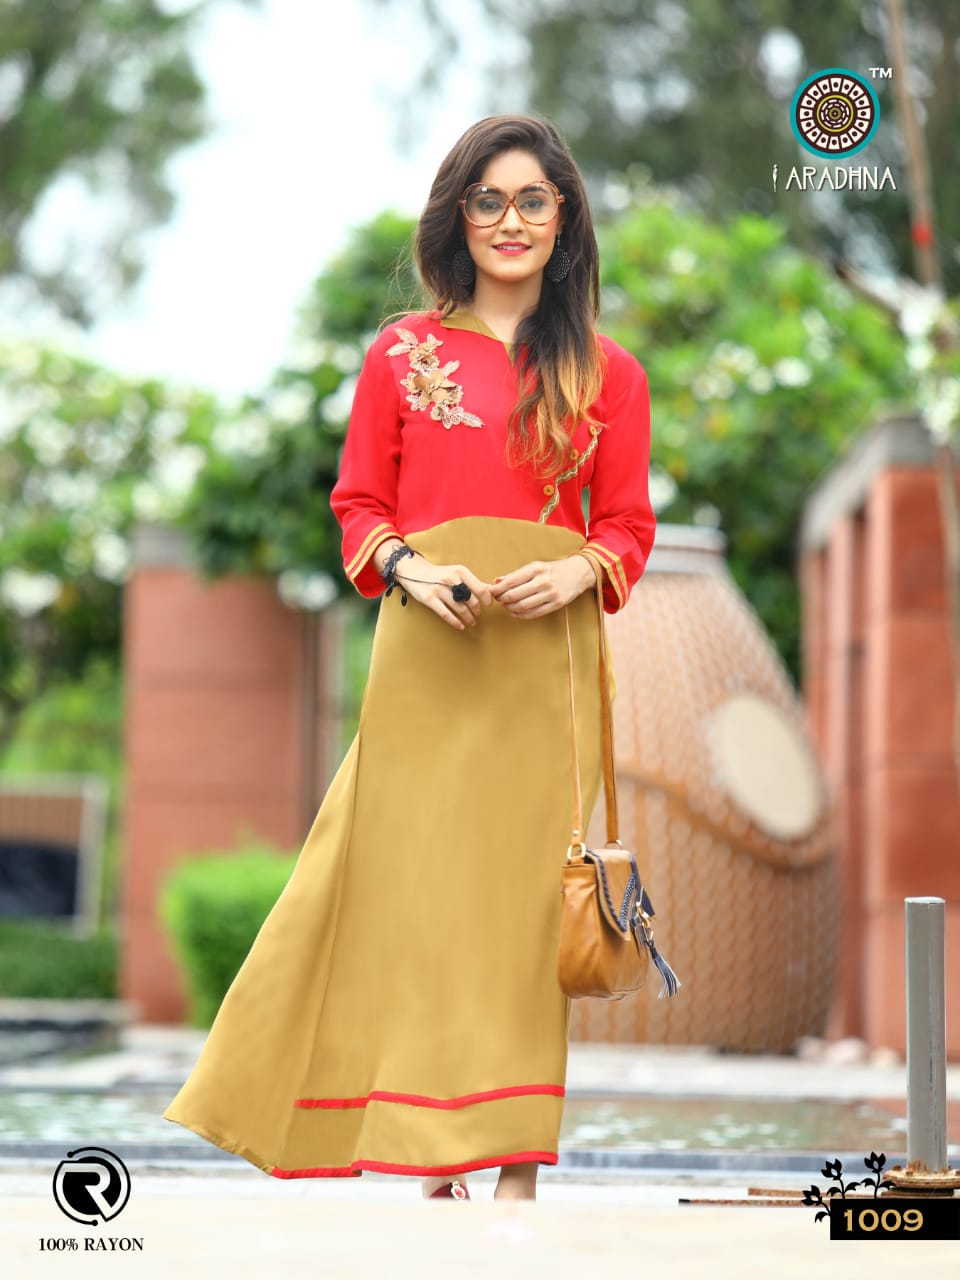 Aradhna Pressnts crystal crush casual fancy collection of kurtis